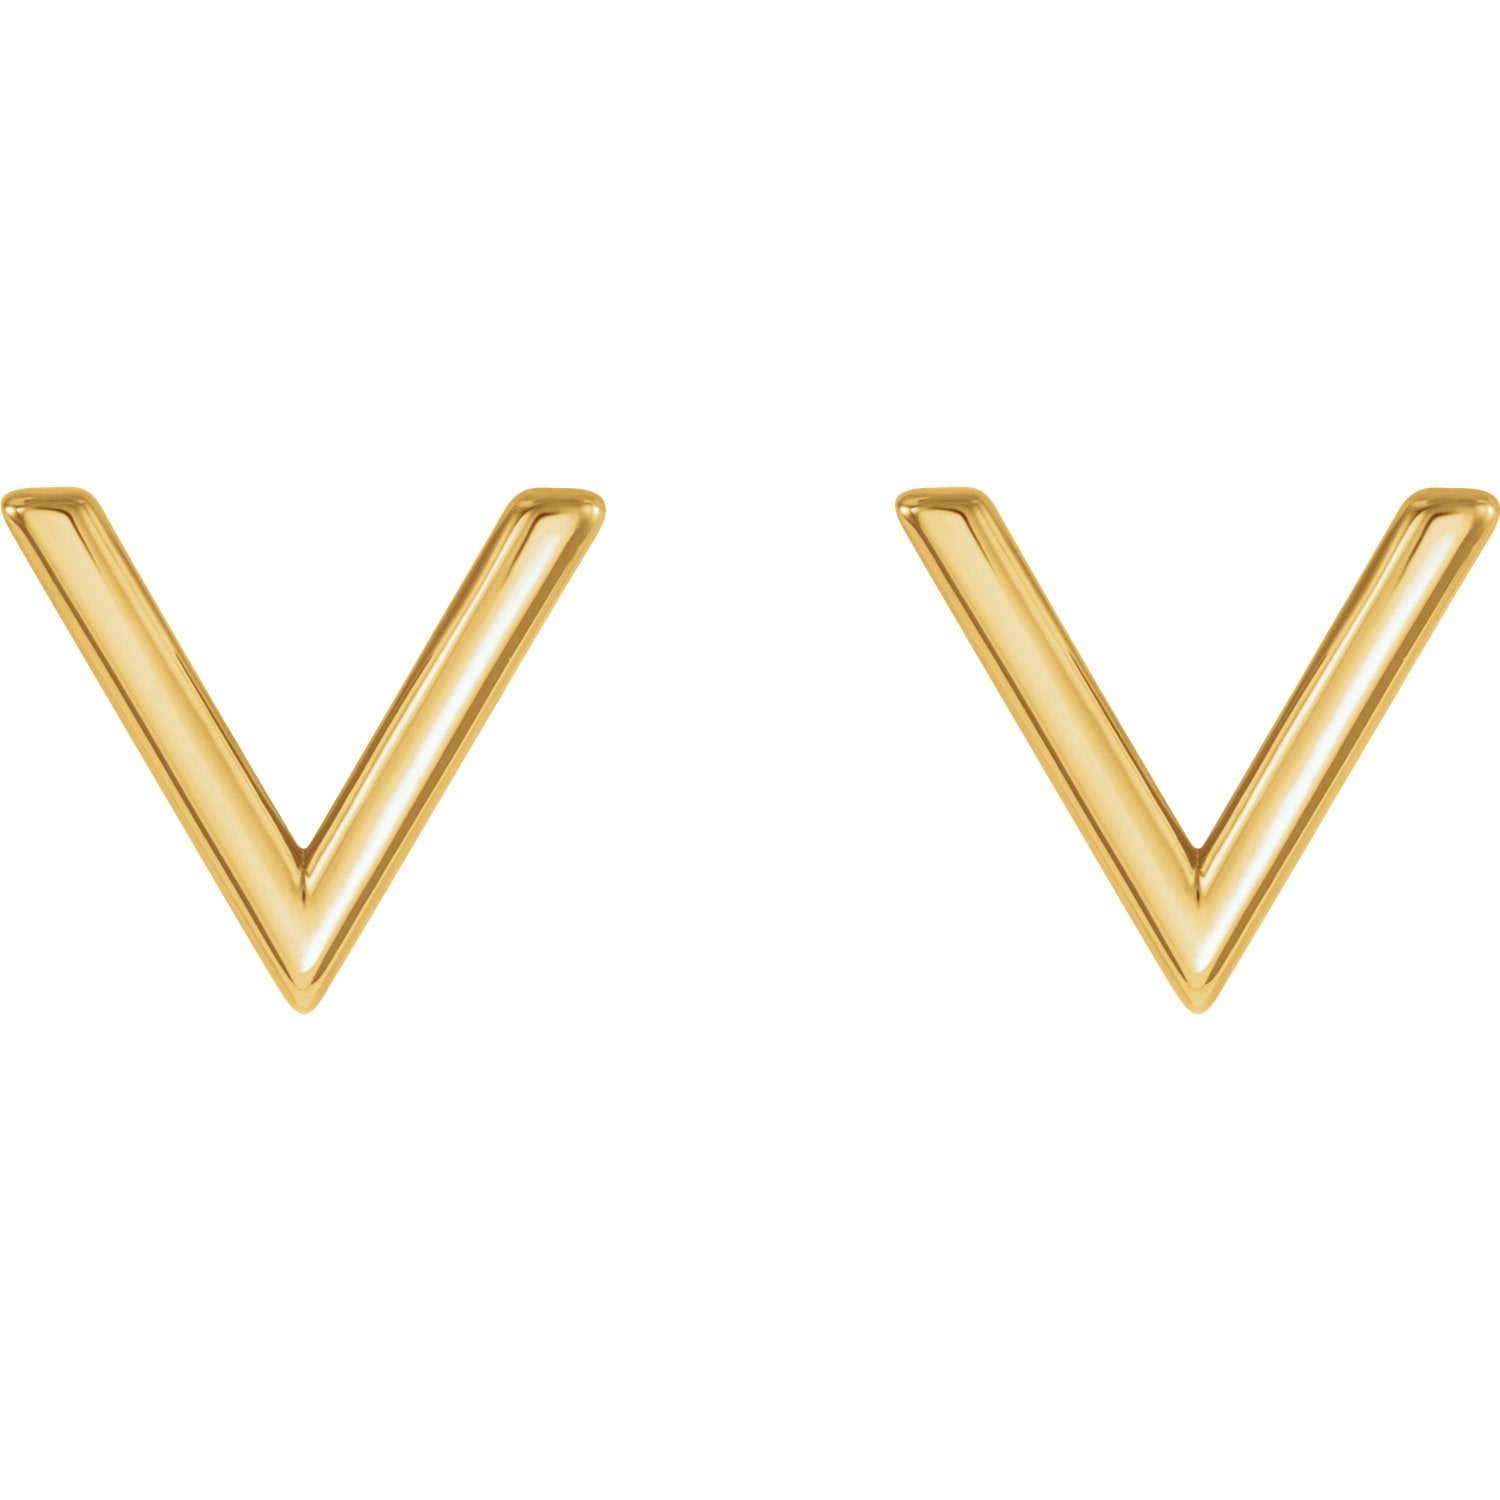 Small "V" Chevron Earrings - 14k Gold (Y or W), Platinum or Sterling Silver